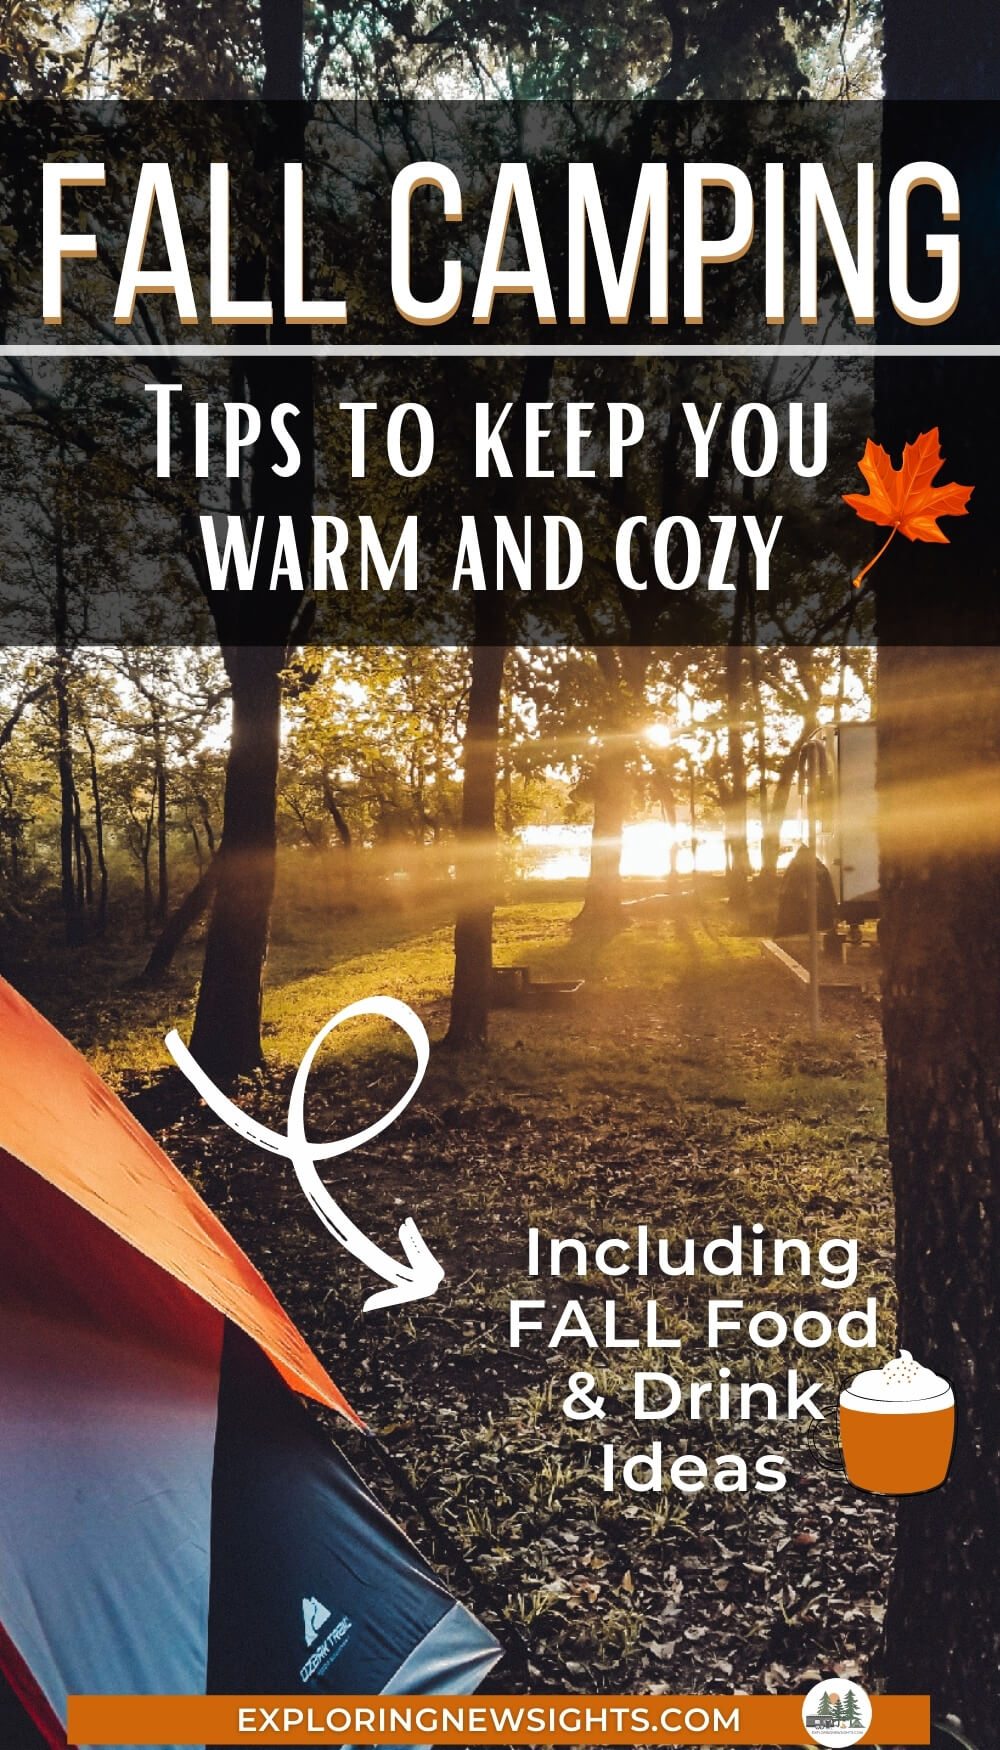 Fall Camping Tips with Fall Food ideas